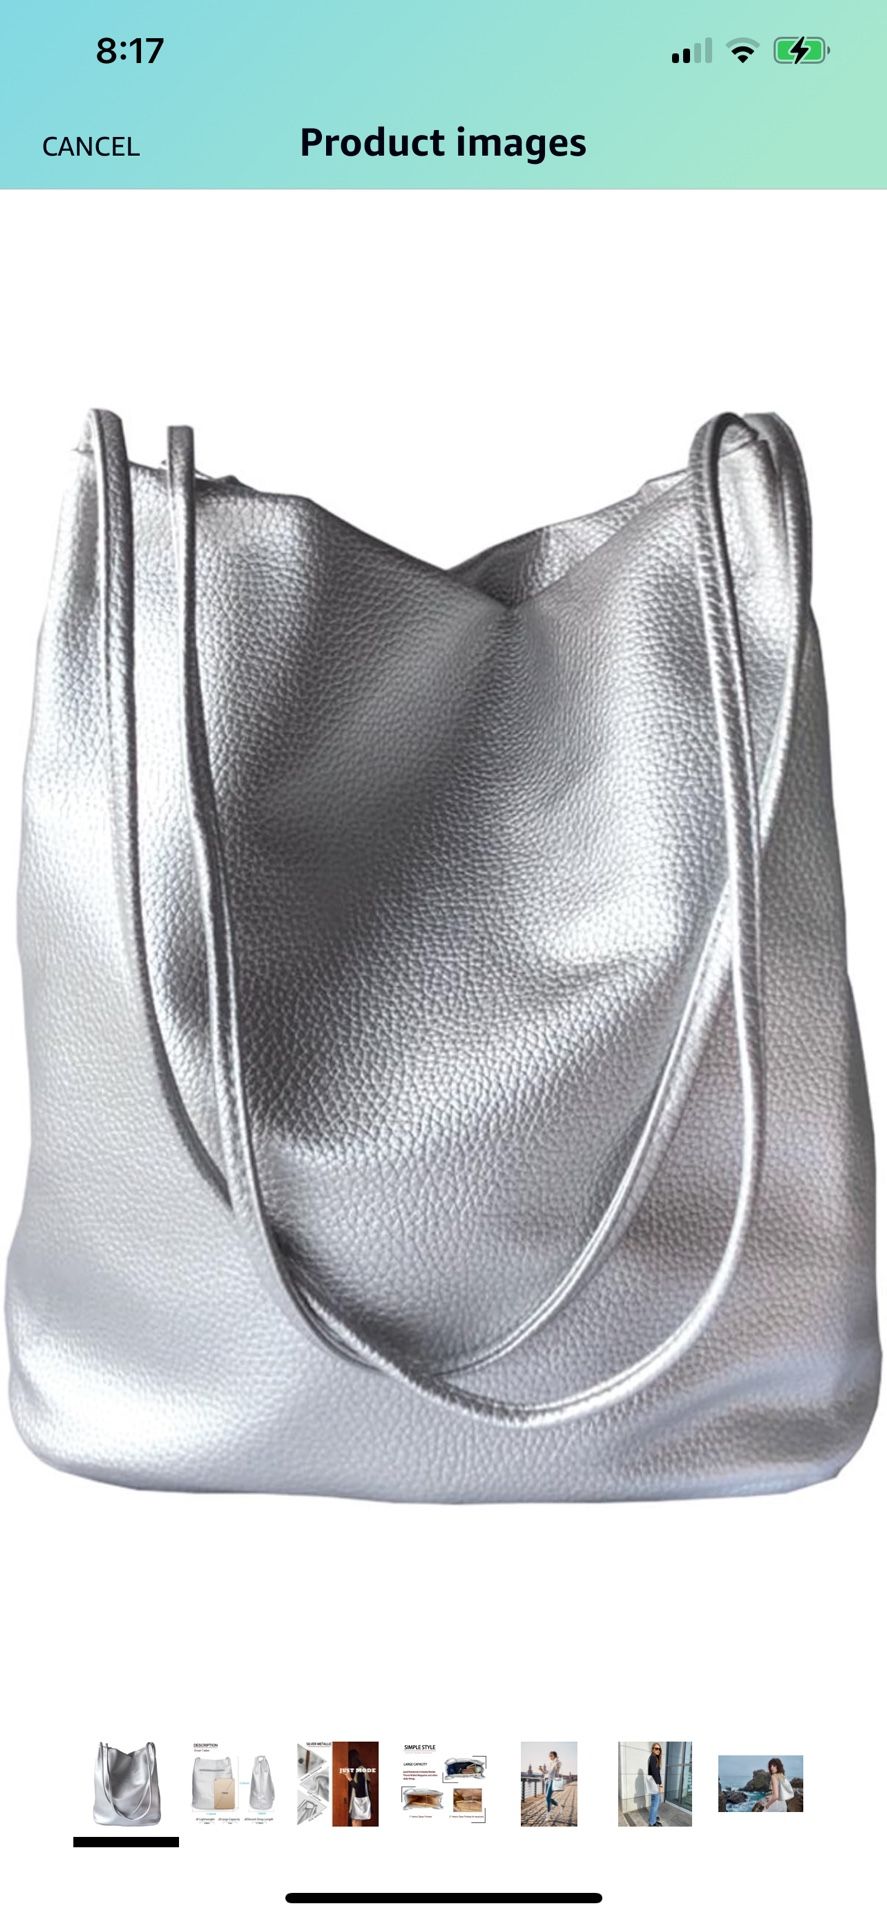 Silver Purse for Women Bucket Tote Bag Large Shoulder Handbags for Ladies Soft Leather Hobo Bags